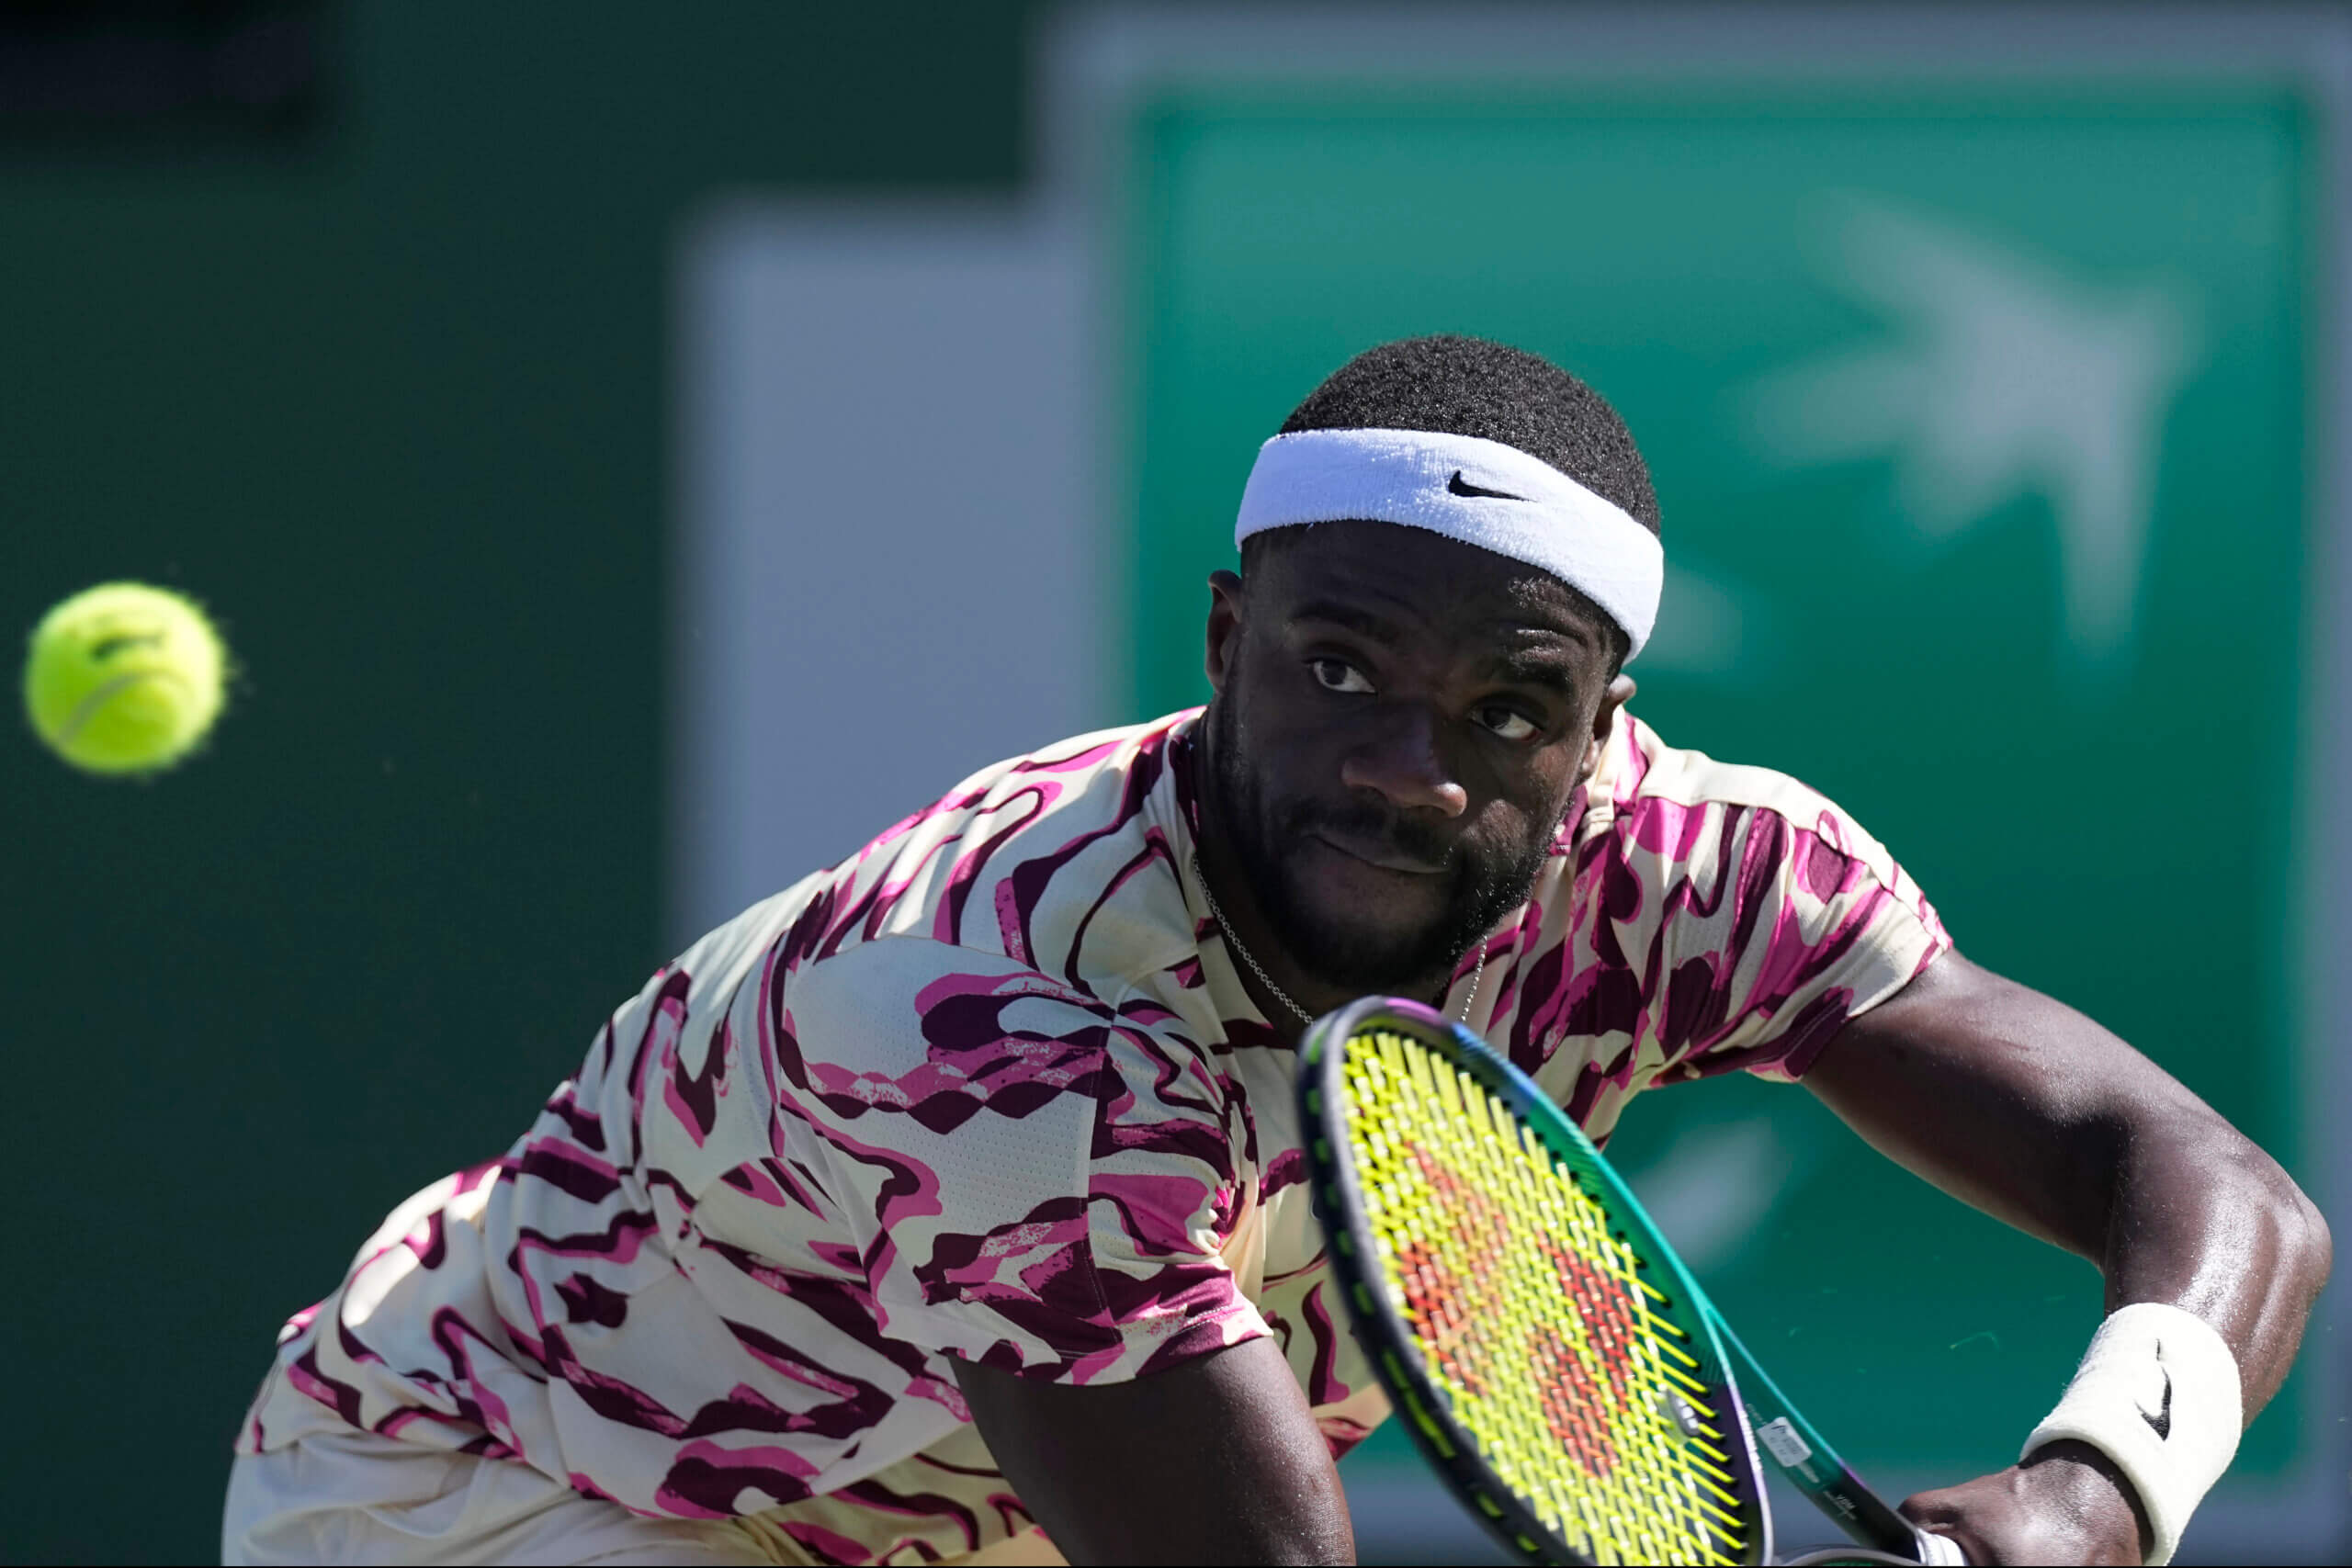 Tiafoe wins Clay Court Championships, moves to 11th in world rankings amNewYork